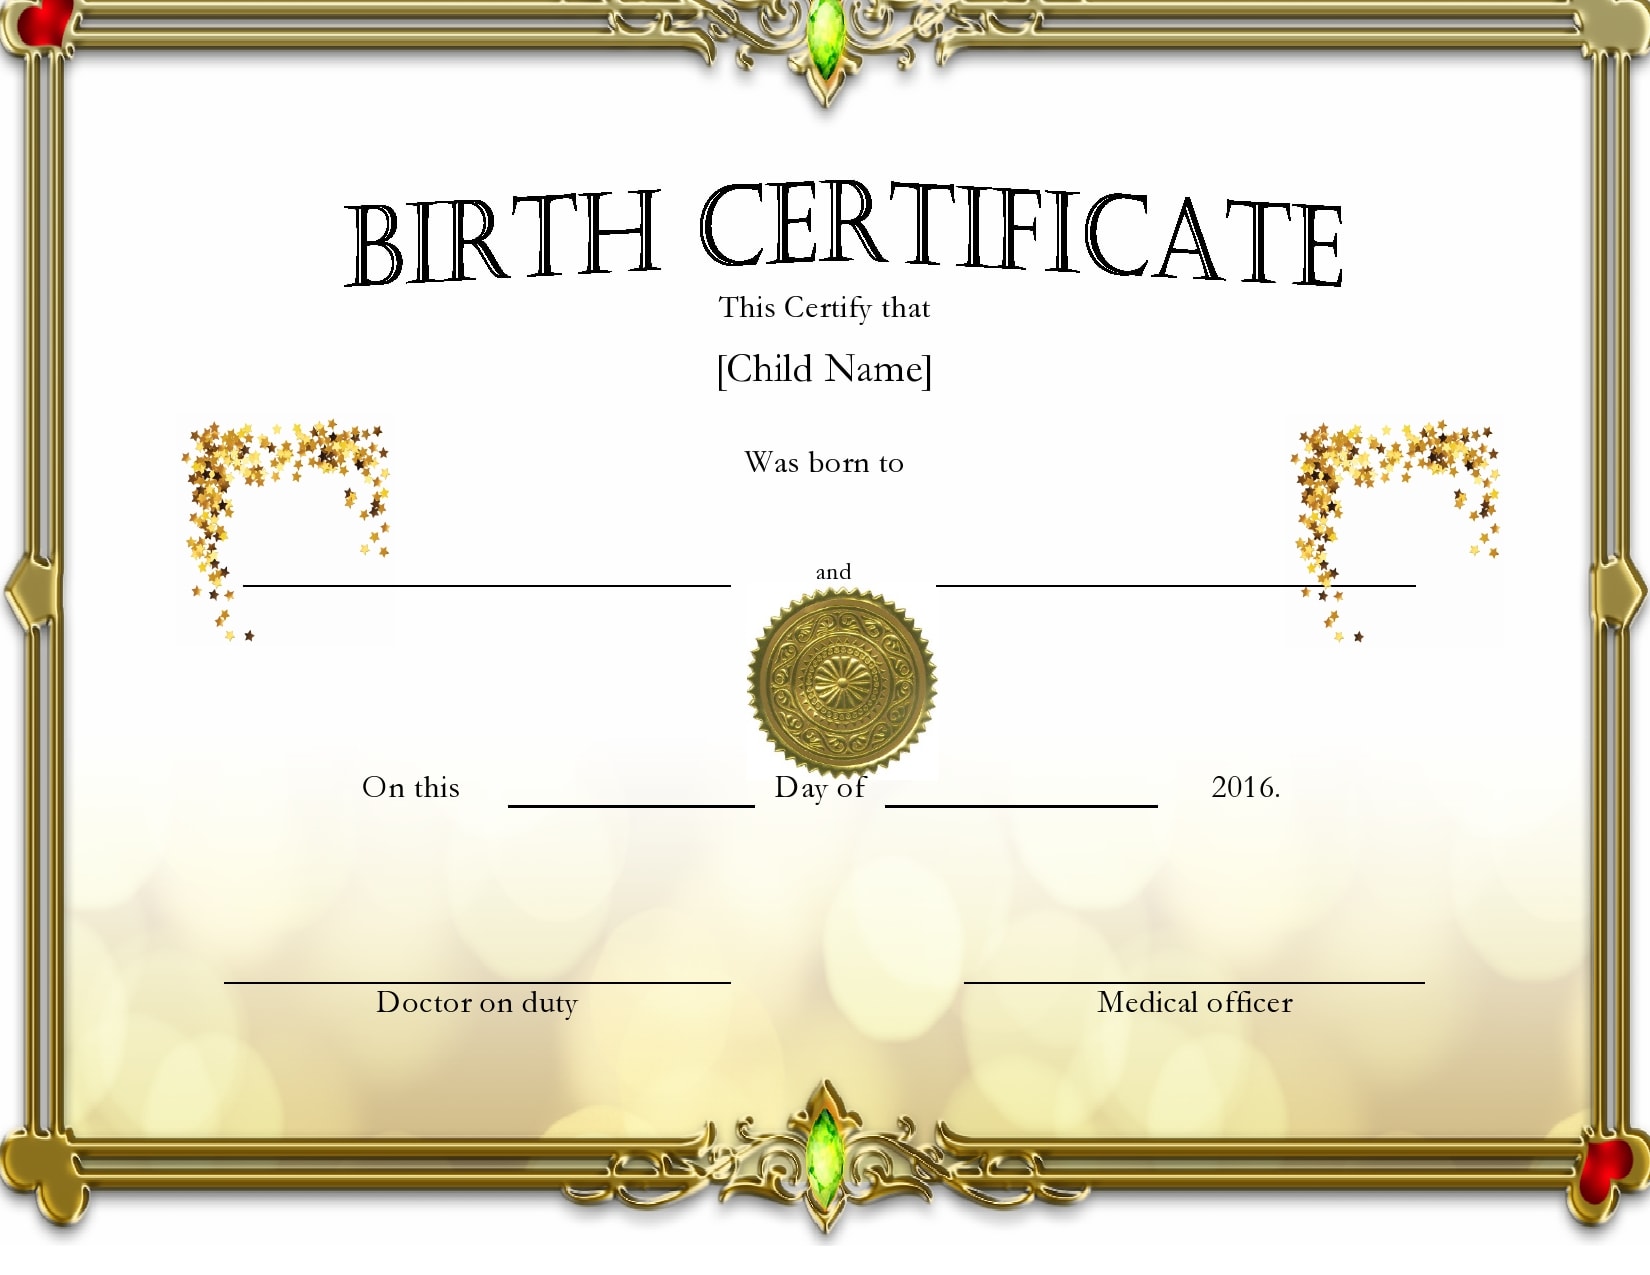 22 Blank Birth Certificate Templates (& Examples) - PrintableTemplates With Official Birth Certificate Template